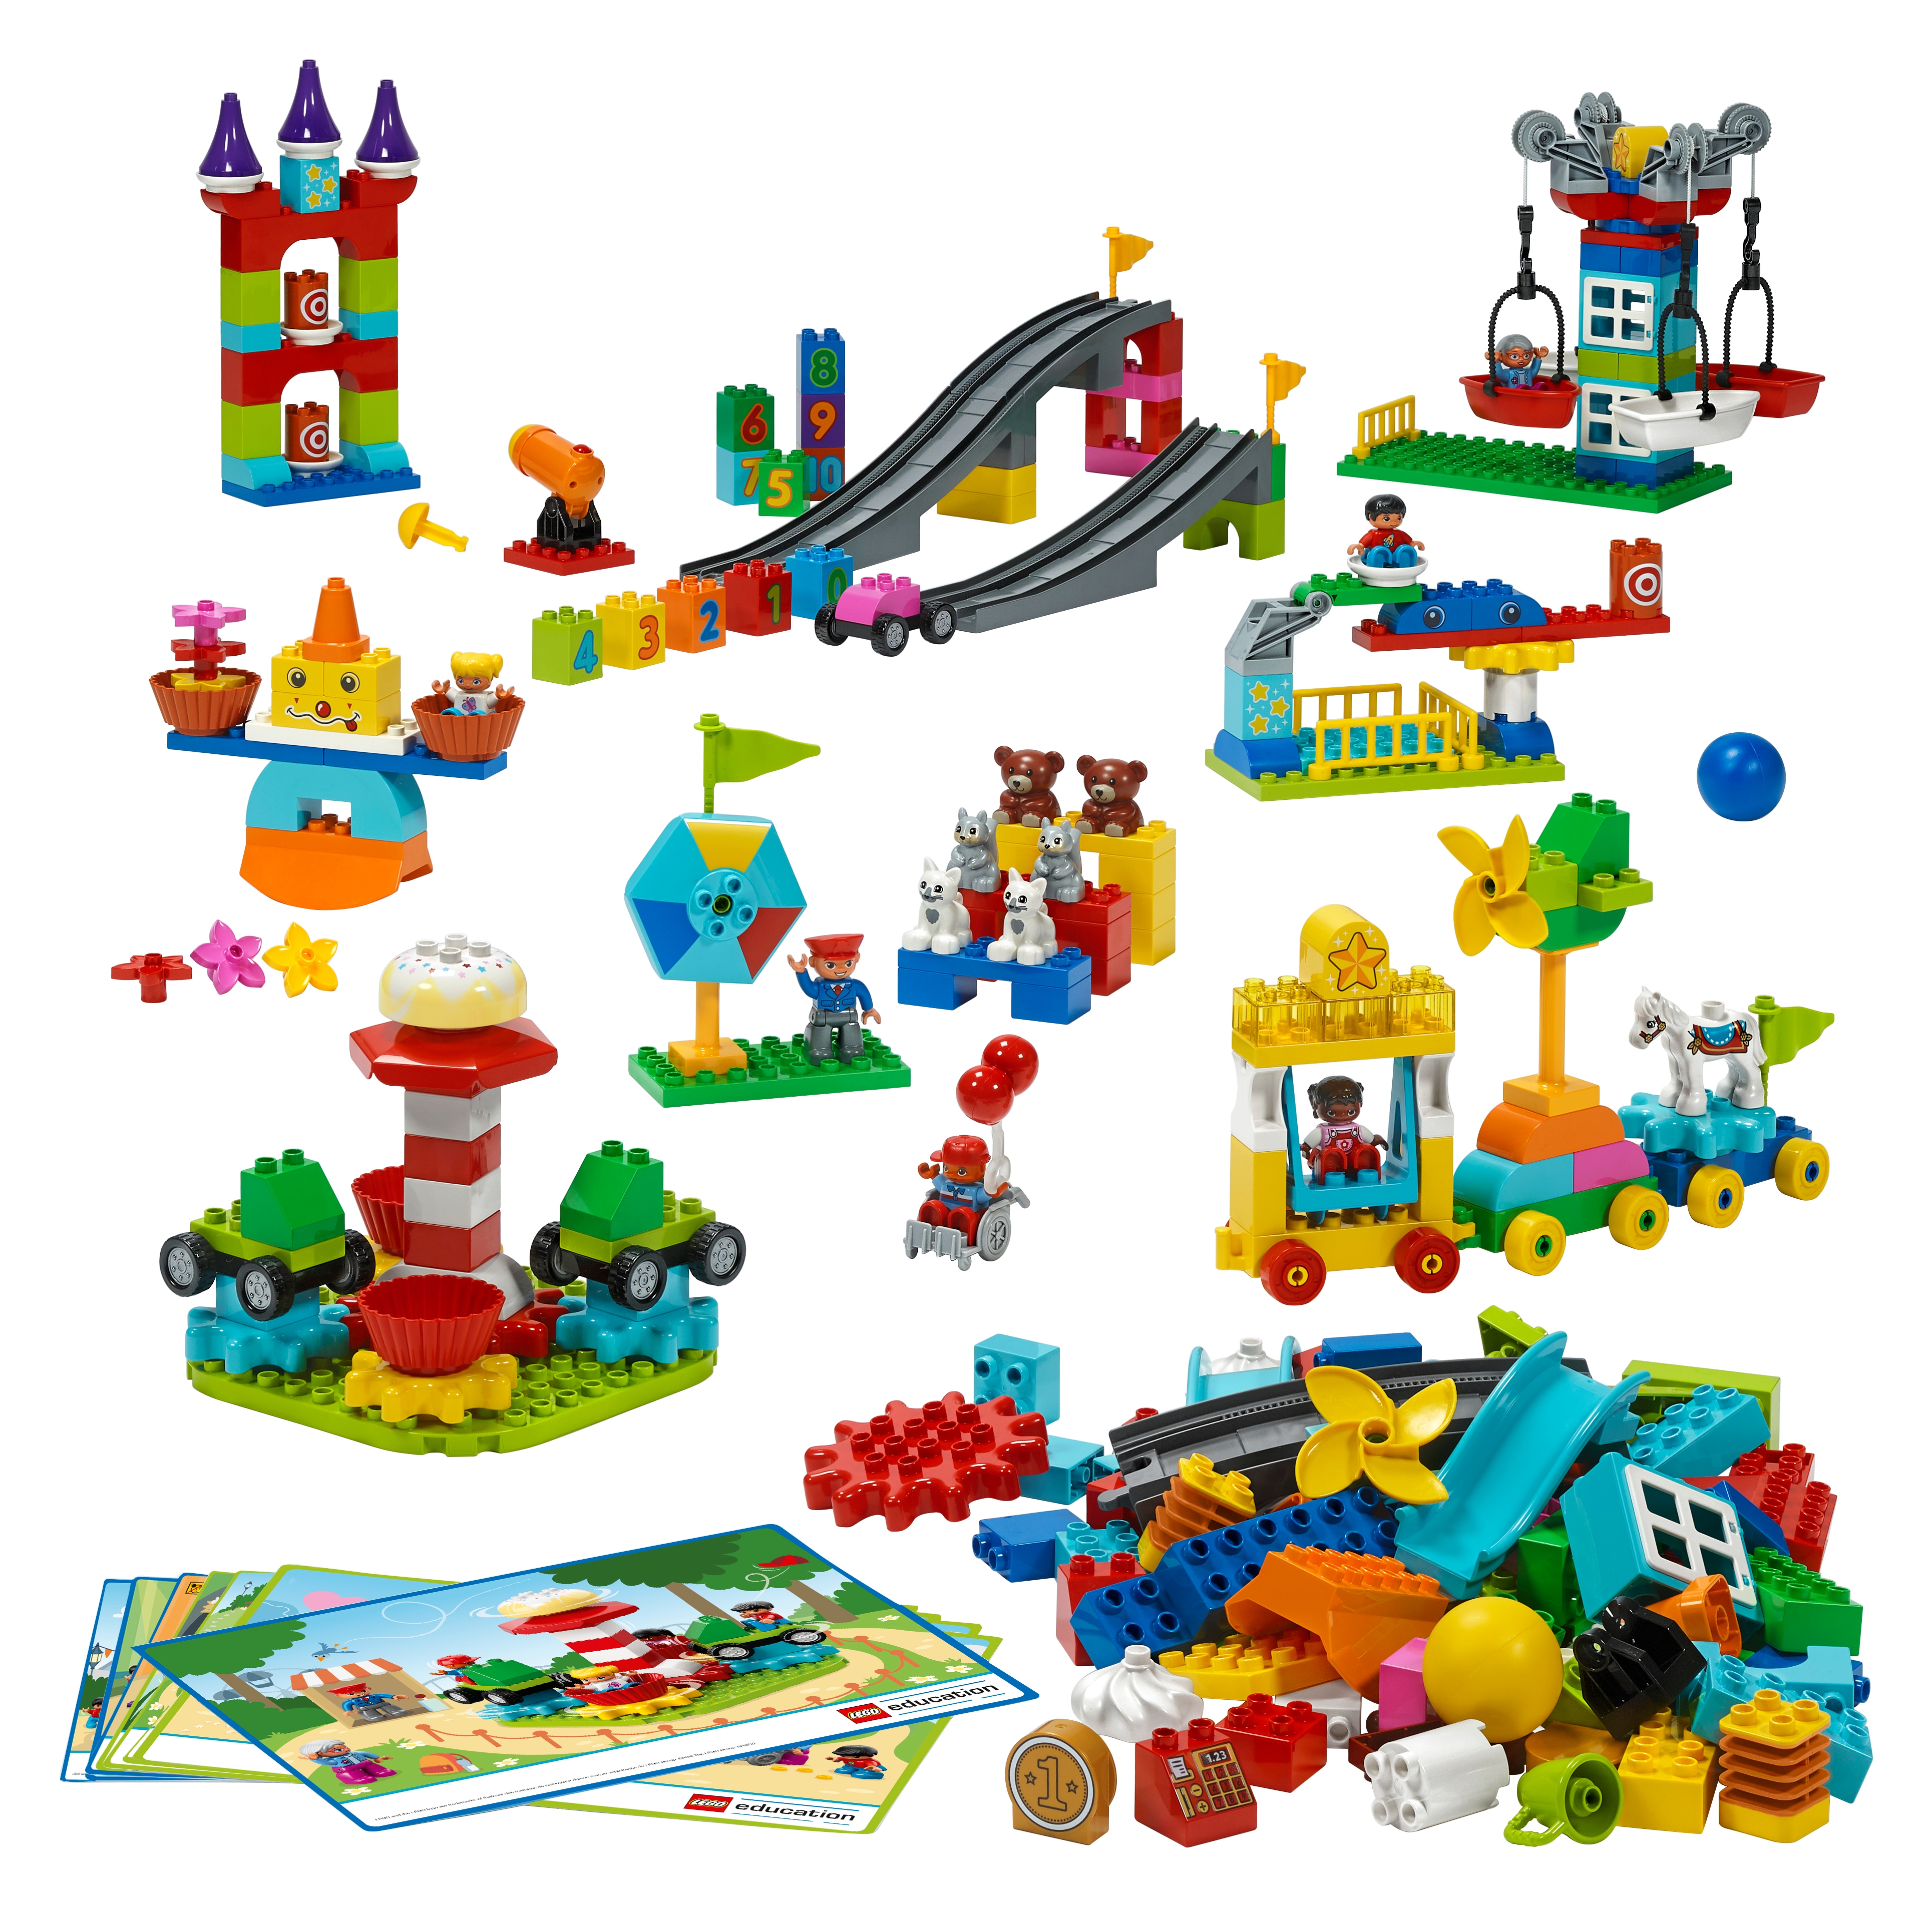 LEGO®　Education　45024　online　at　STEAM　Official　Shop　US　Park　Buy　LEGO®　the